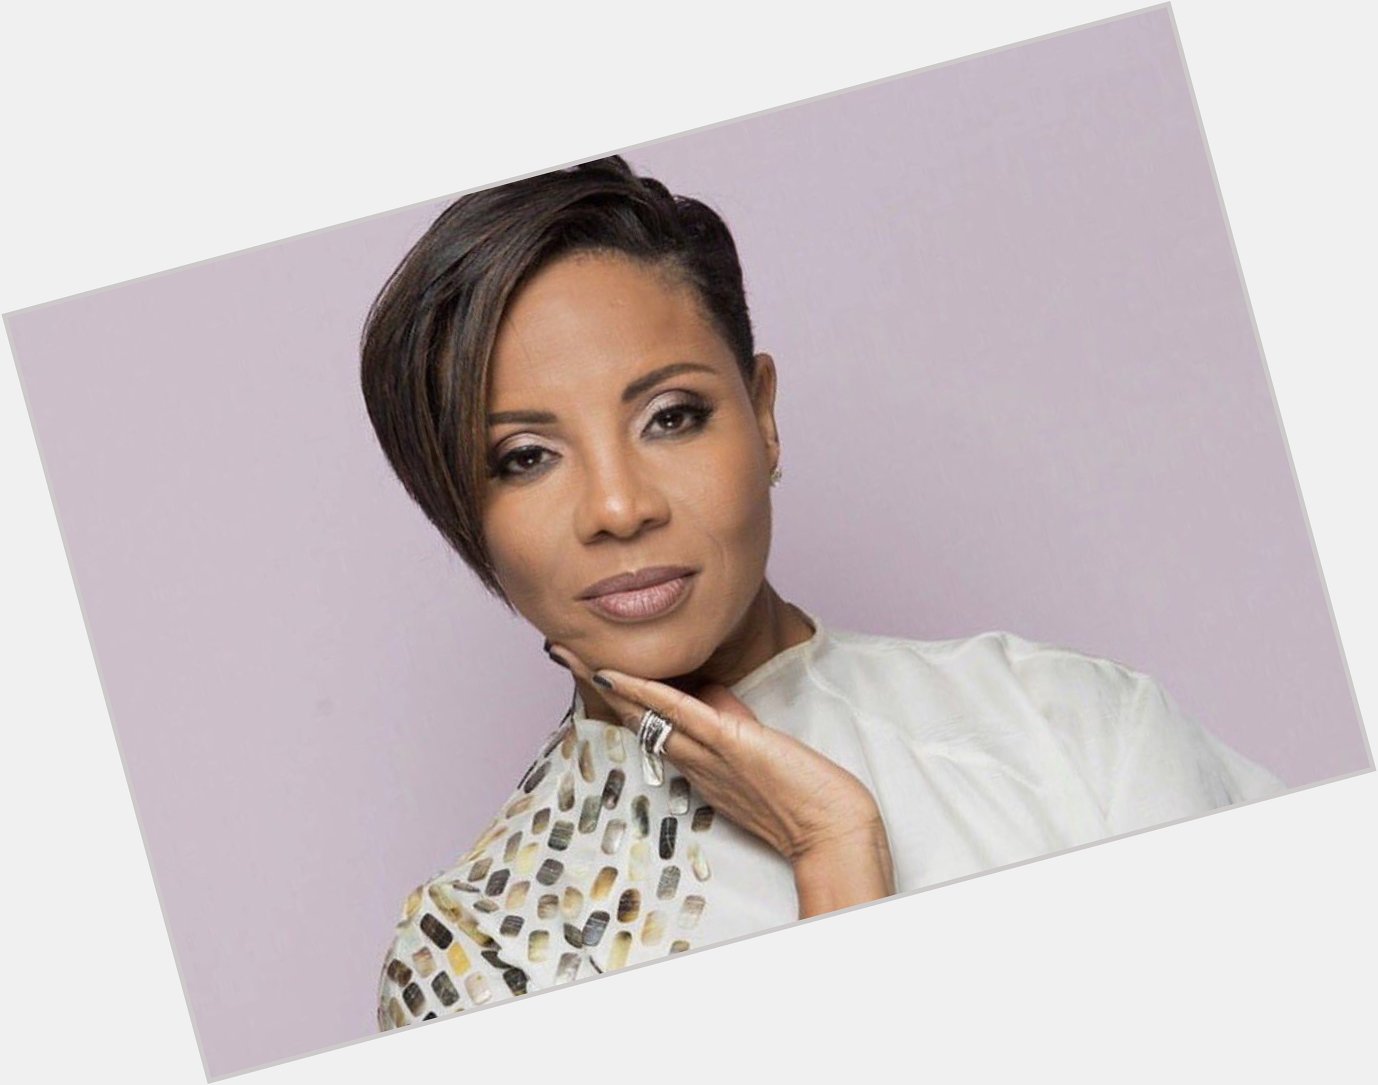 Happy Birthday to MC Lyte...a pioneer and fearless woman who paved the way!  